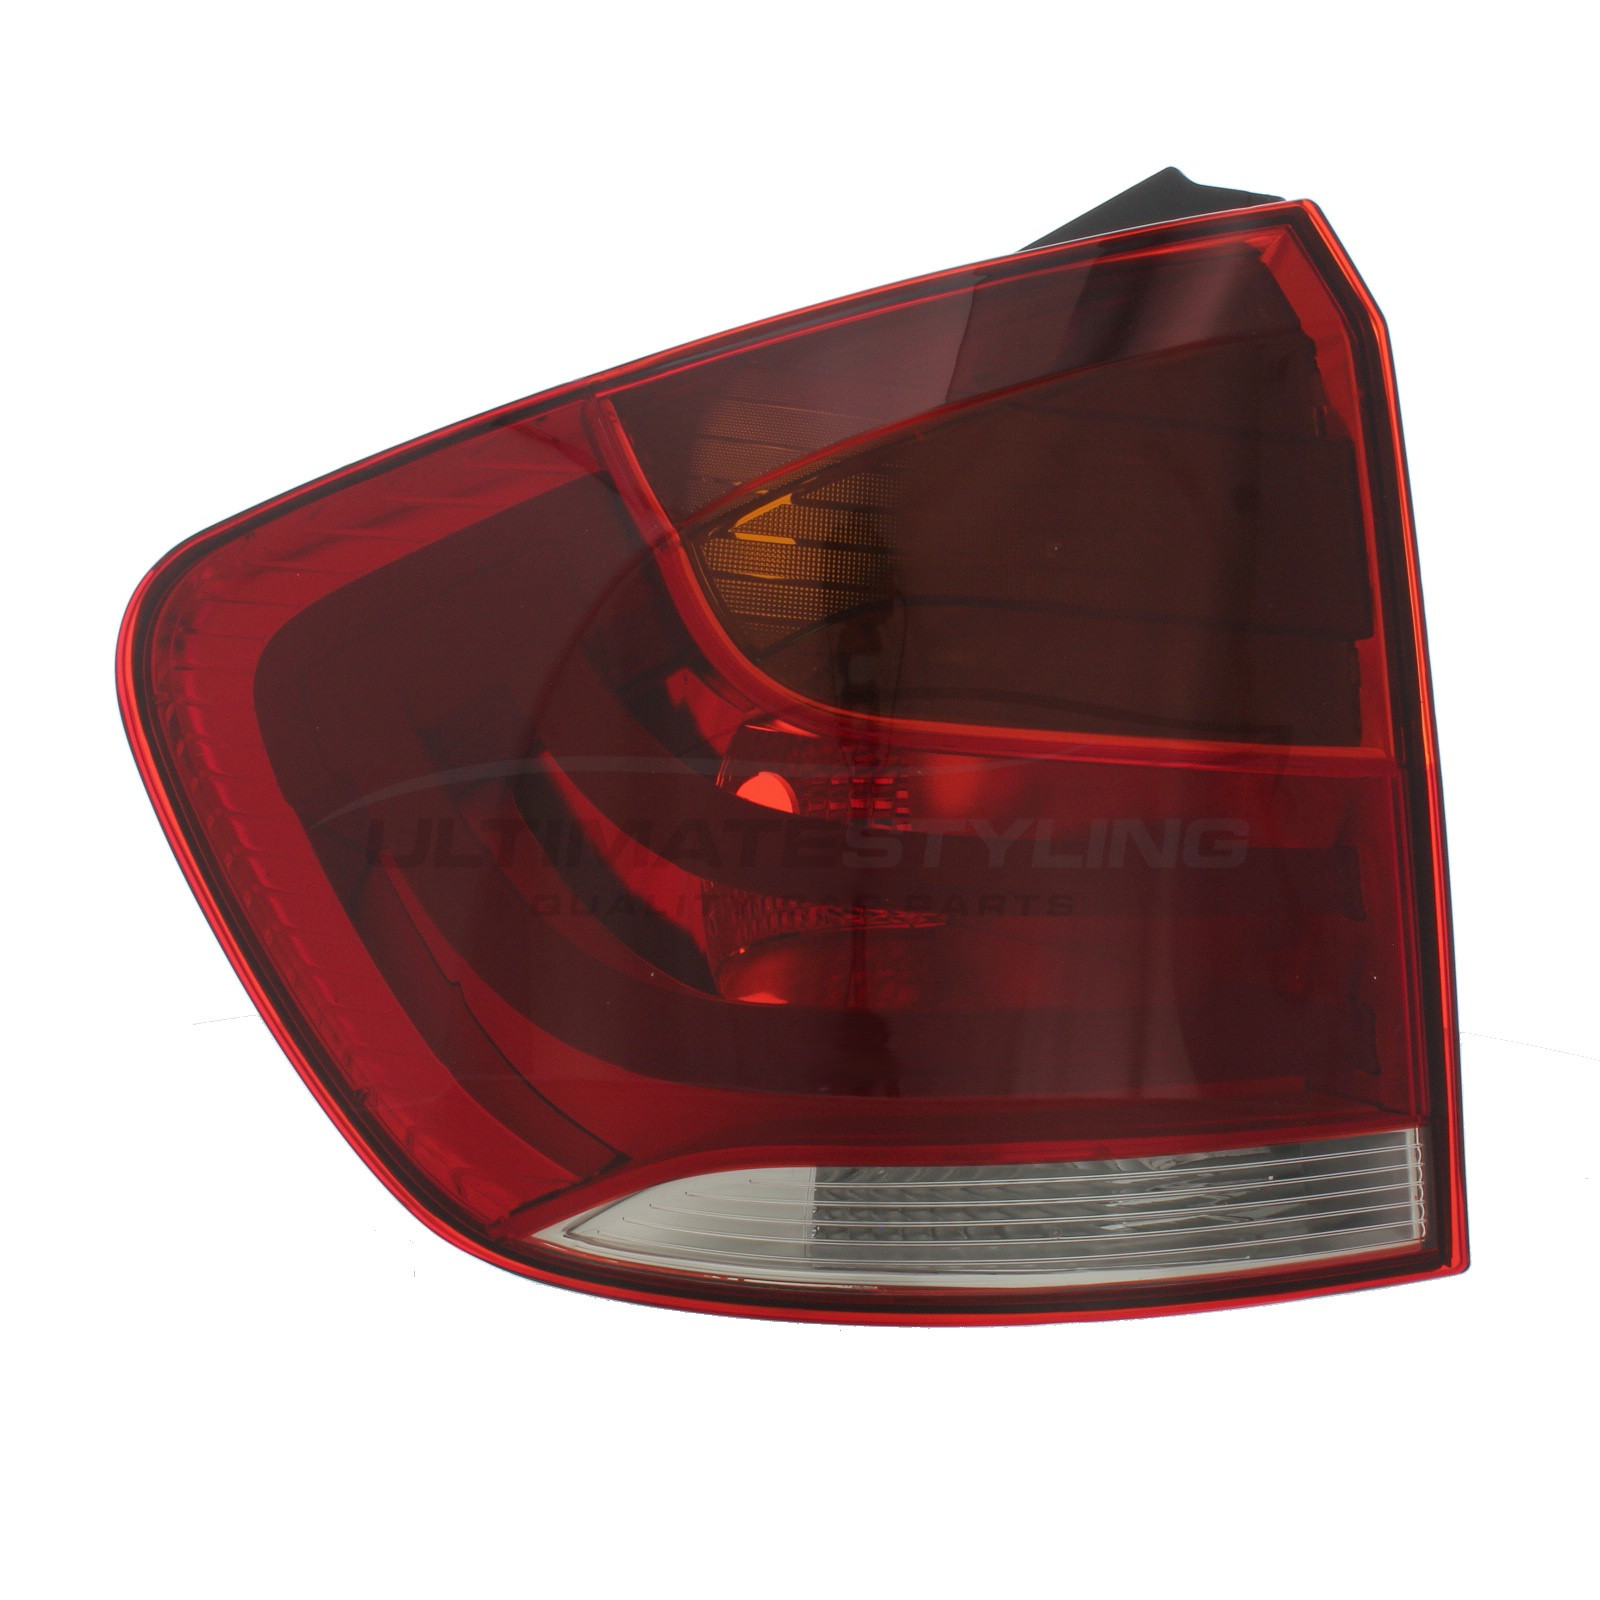 BMW X1 2009-2016 Non-LED Outer (Wing) Rear Light / Tail Light Excluding Bulb Holder Passenger Side (LH)